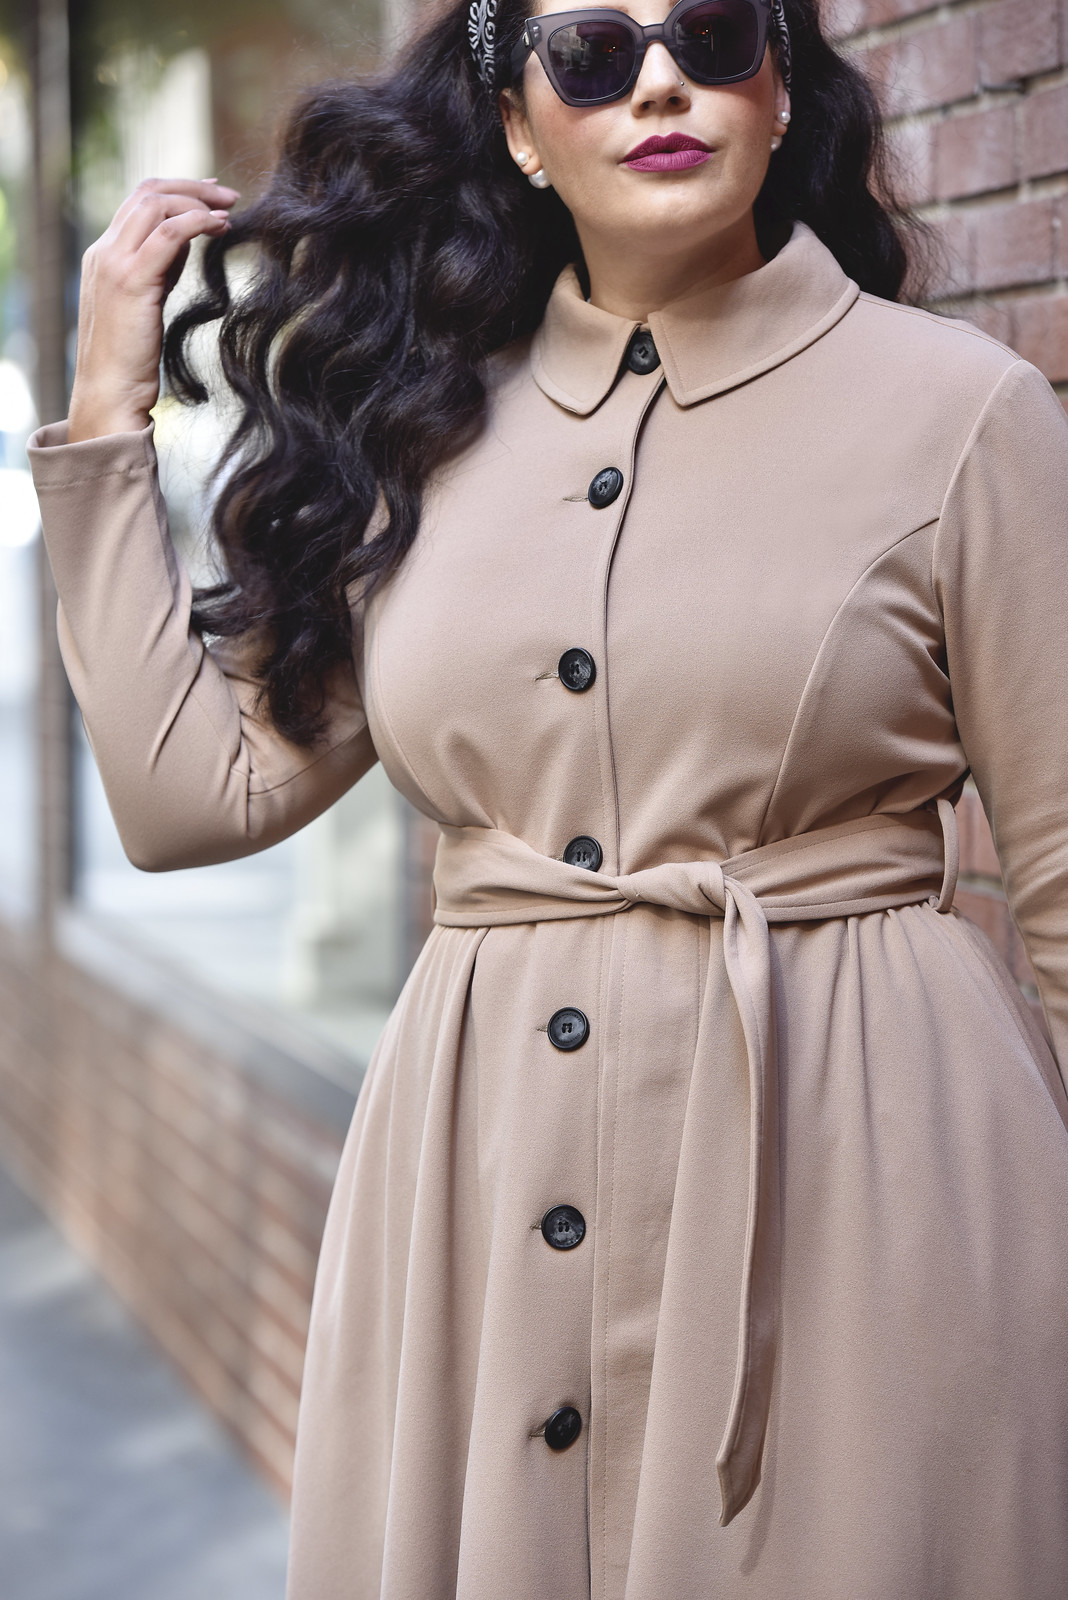 Girl With Curves Collection Custom Button Trench #GirlWithCurves #collection #trench #dress #longsleeve #coat #plussize #curvy #fashion #stylish #modest #Tanesha